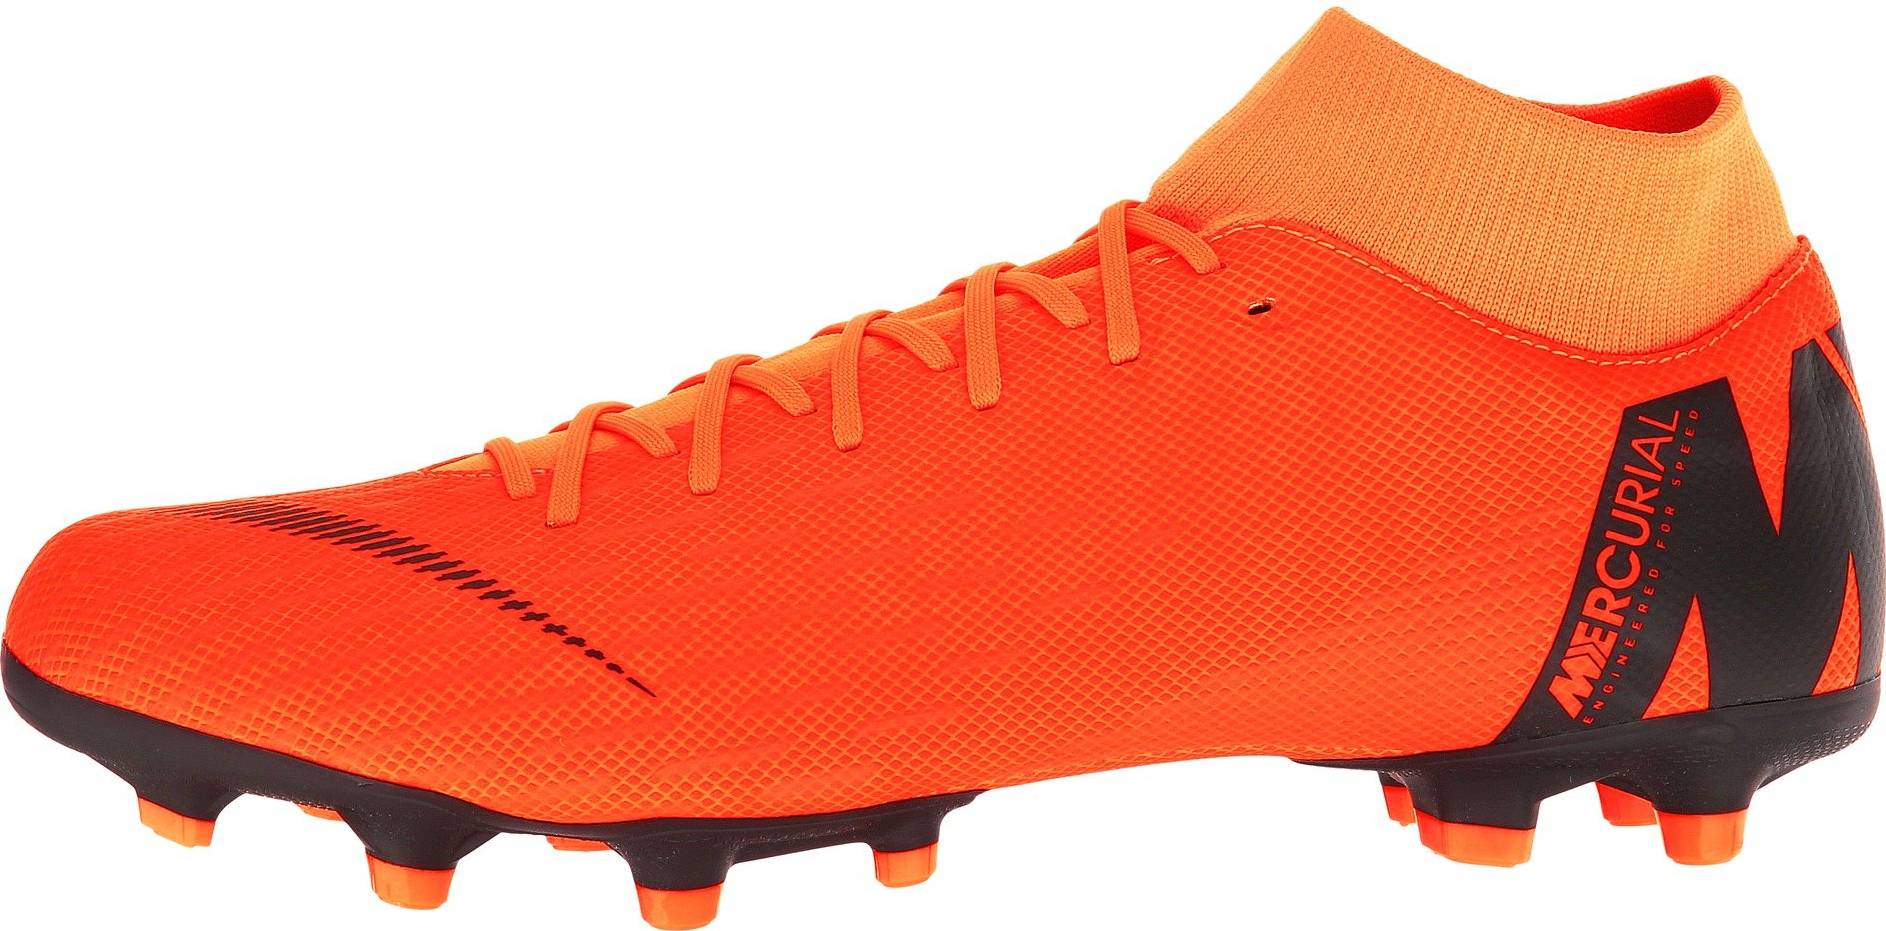 superfly 6 academy mg mens soccer cleats